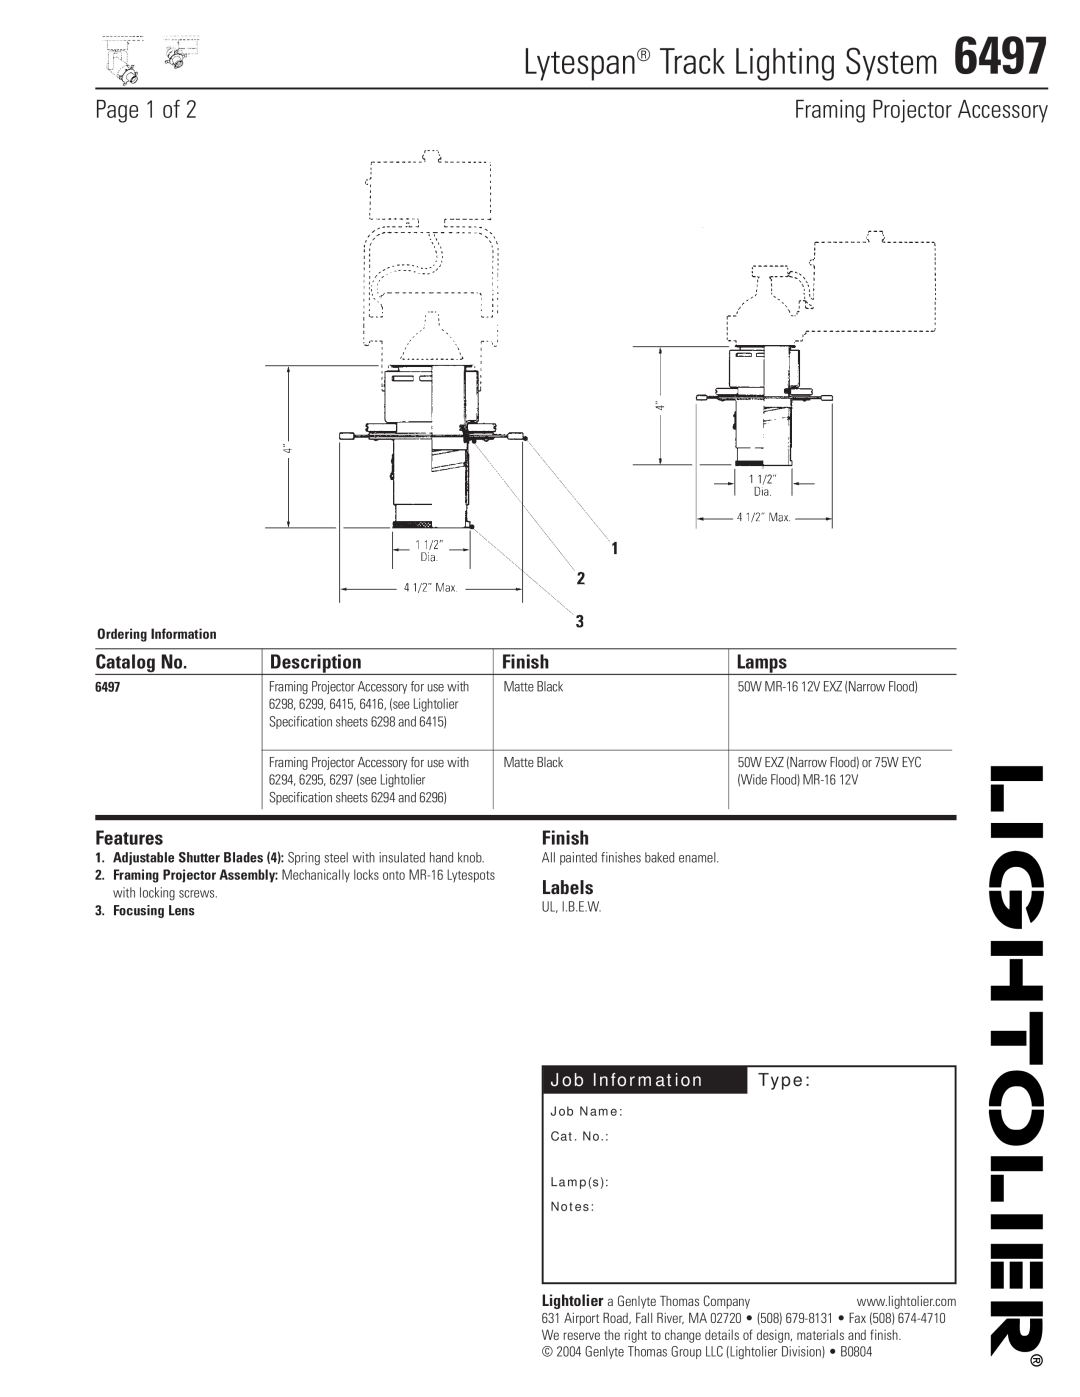 Lightolier 6497 specifications Page 1 of, Framing Projector Accessory, Catalog No, Description, Finish, Lamps, Features 